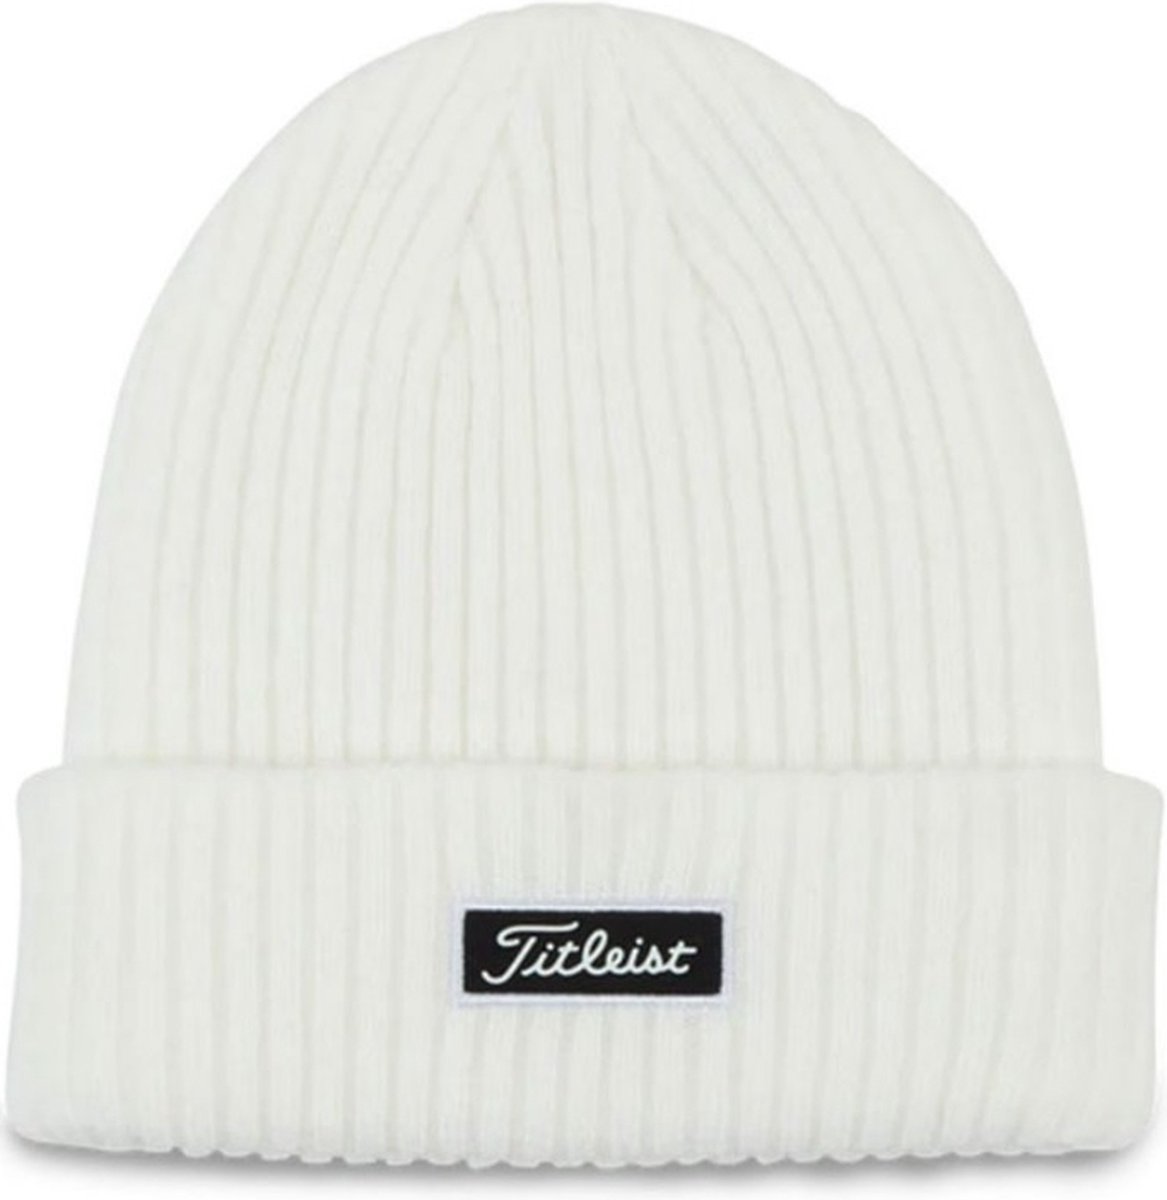 Titleist witte muts - one size